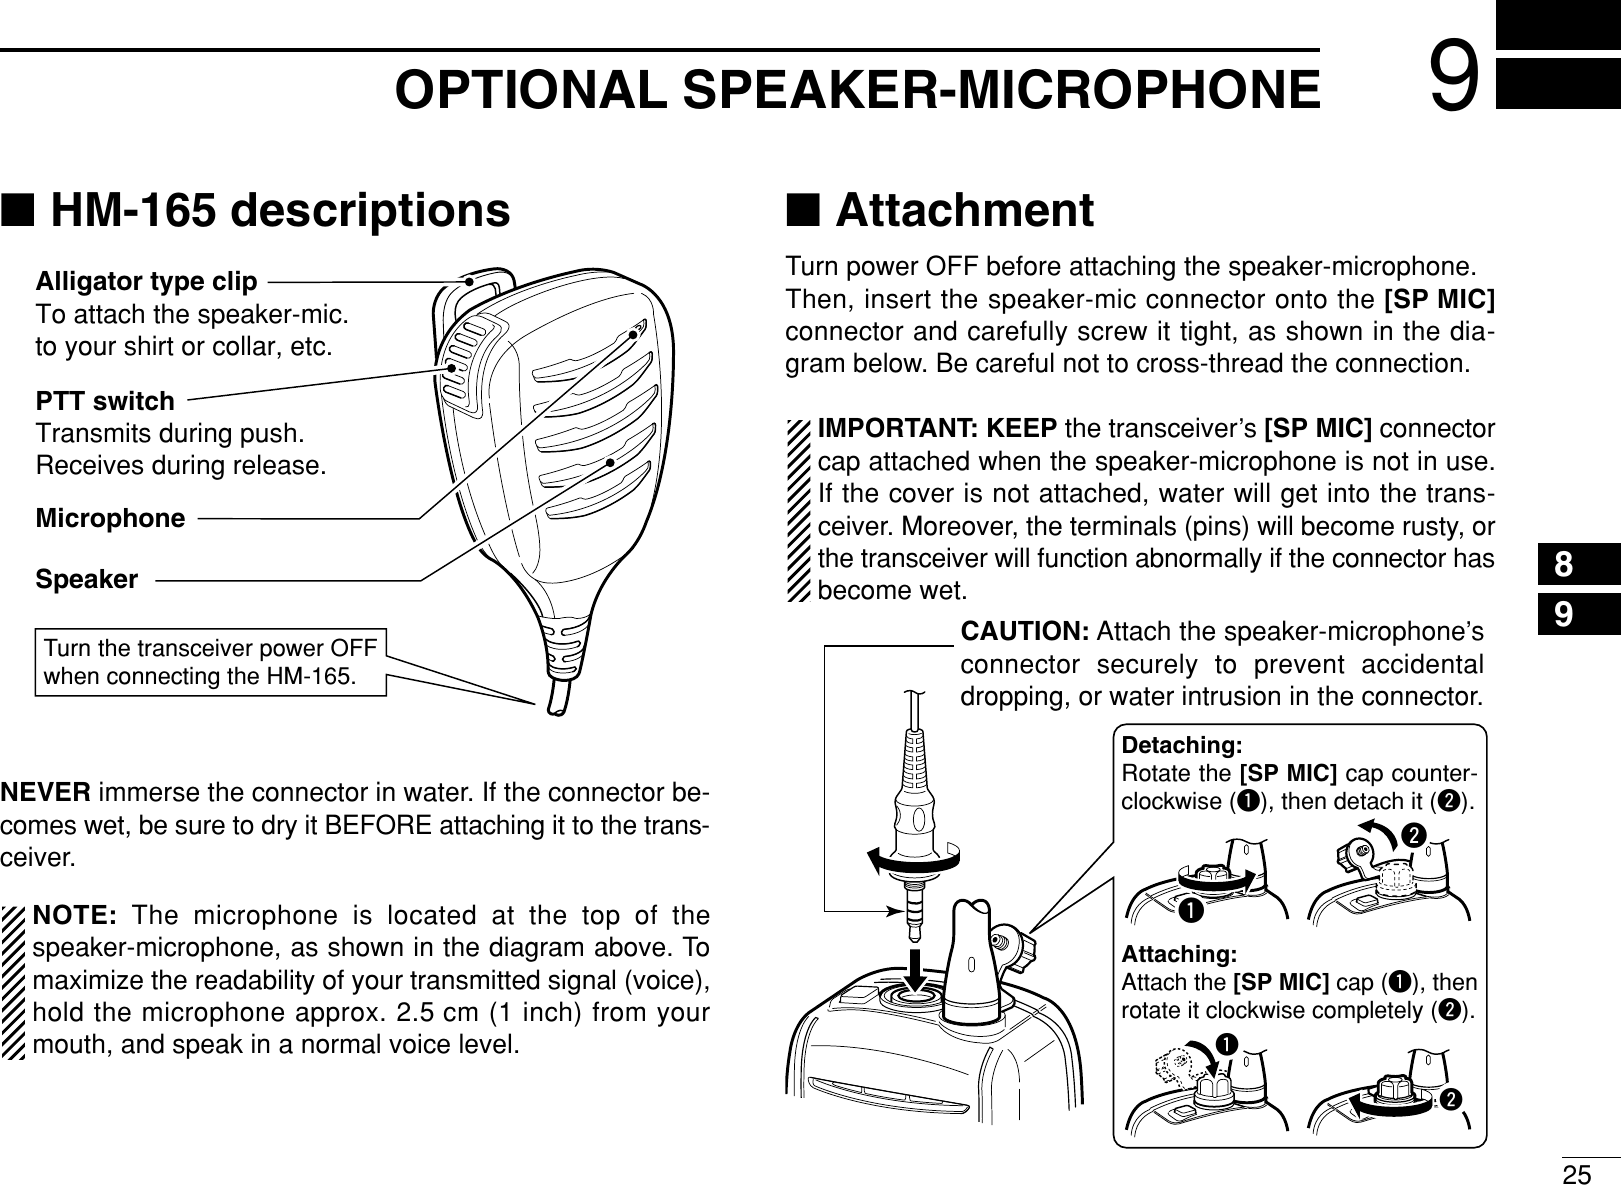 259OPTIONAL SPEAKER-MICROPHONE12345678910111213141516■HM-165 descriptionsNEVER immerse the connector in water. If the connector be-comes wet, be sure to dry it BEFORE attaching it to the trans-ceiver.NOTE: The microphone is located at the top of thespeaker-microphone, as shown in the diagram above. Tomaximize the readability of your transmitted signal (voice),hold the microphone approx. 2.5 cm (1 inch) from yourmouth, and speak in a normal voice level.■AttachmentTurn power OFF before attaching the speaker-microphone.Then, insert the speaker-mic connector onto the [SP MIC]connector and carefully screw it tight, as shown in the dia-gram below. Be careful not to cross-thread the connection.IMPORTANT: KEEP the transceiver’s [SP MIC] connectorcap attached when the speaker-microphone is not in use.If the cover is not attached, water will get into the trans-ceiver. Moreover, the terminals (pins) will become rusty, orthe transceiver will function abnormally if the connector hasbecome wet.CAUTION: Attach the speaker-microphone’sconnector securely to prevent accidental dropping, or water intrusion in the connector.Detaching:Rotate the [SP MIC] cap counter-clockwise (q), then detach it (w).Attaching:Attach the [SP MIC] cap (q), then rotate it clockwise completely (w).qwqwPTT switchTransmits during push.Receives during release.MicrophoneSpeakerAlligator type clipTo attach the speaker-mic.to your shirt or collar, etc.Turn the transceiver power OFF when connecting the HM-165.